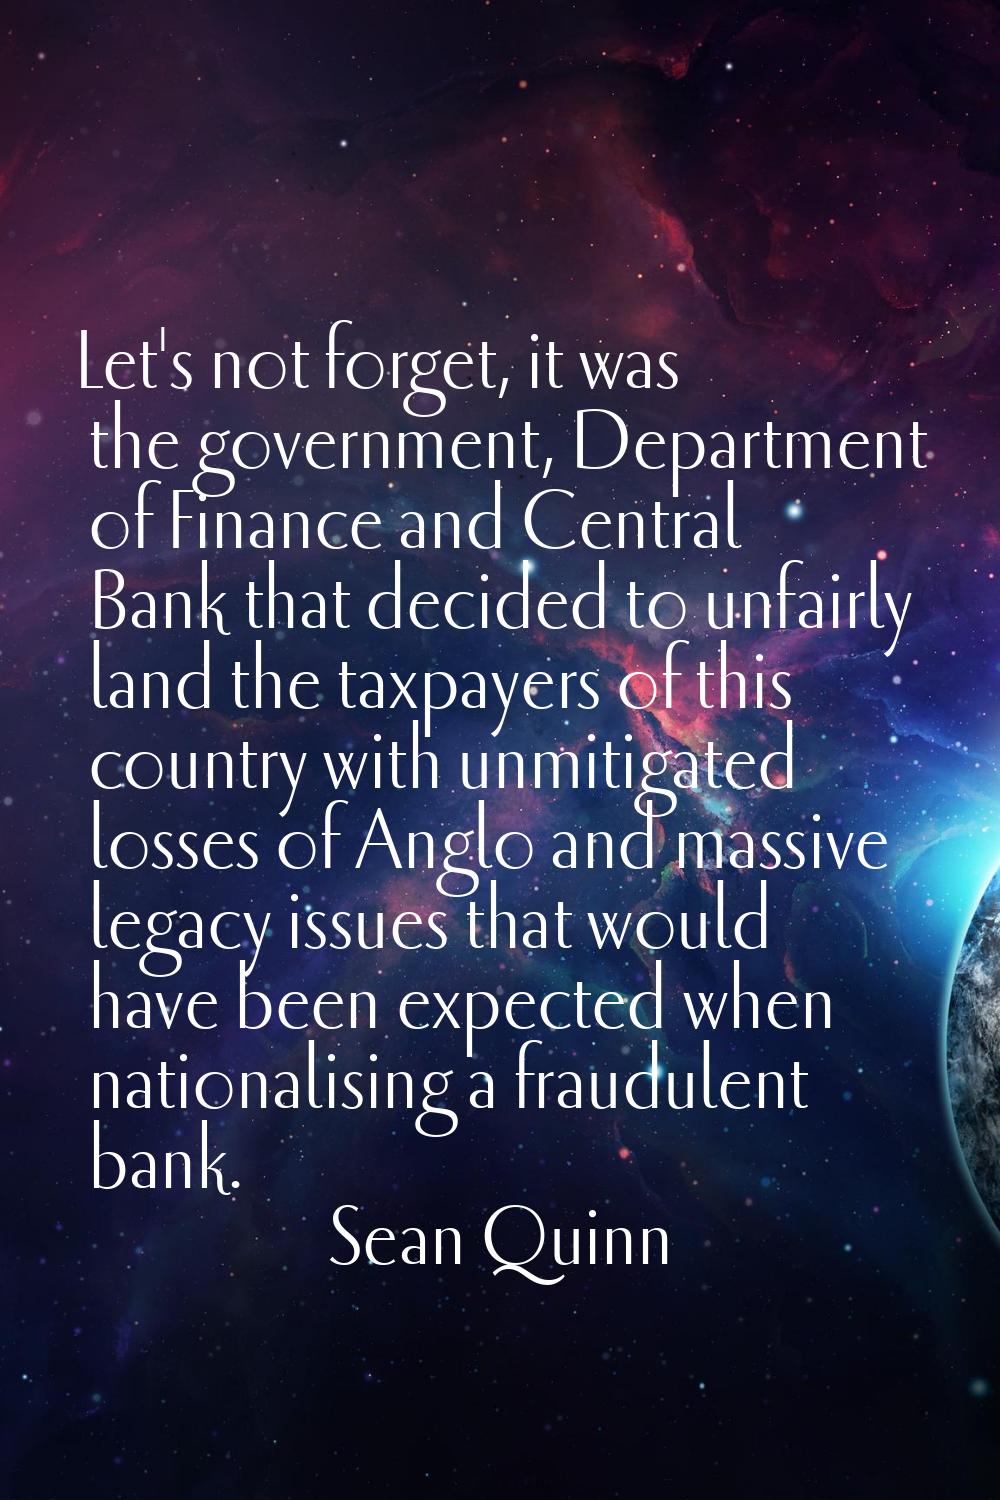 Let's not forget, it was the government, Department of Finance and Central Bank that decided to unf